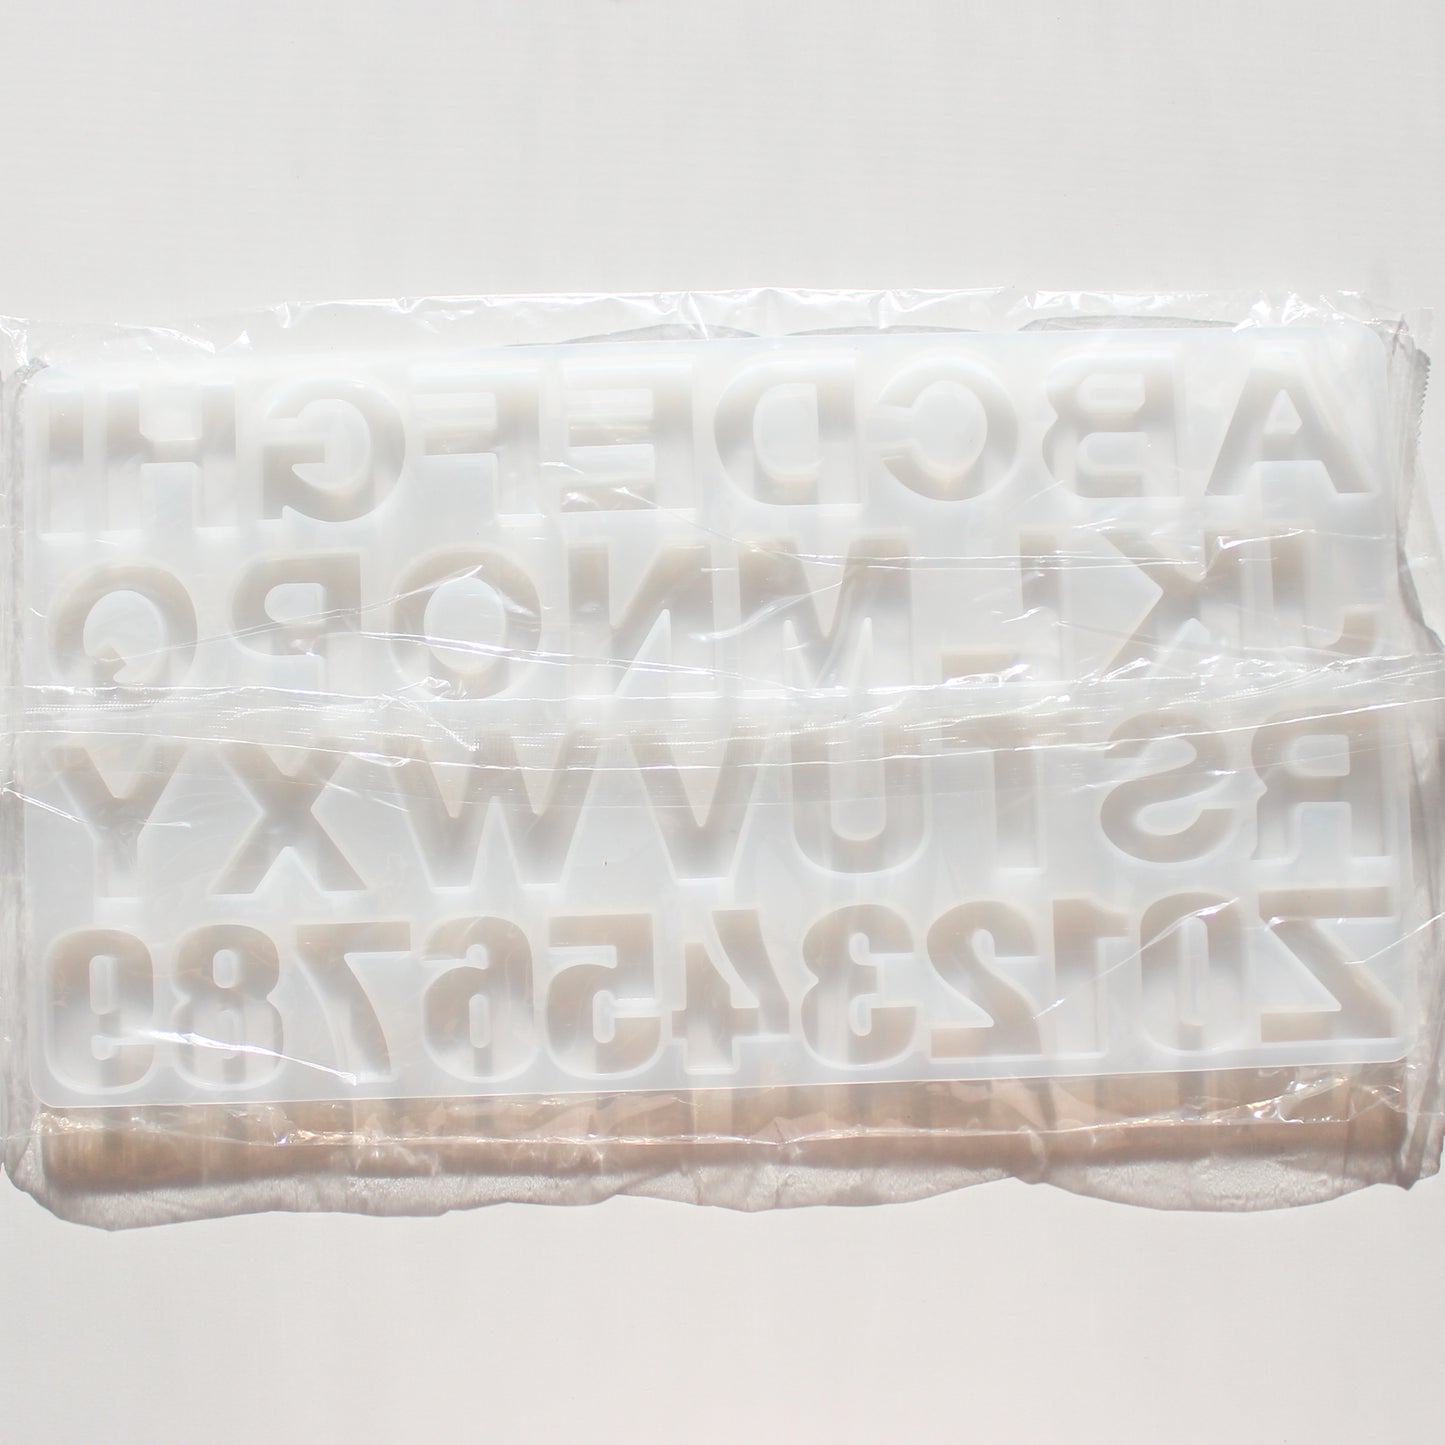 Resin Letters Mold (New)